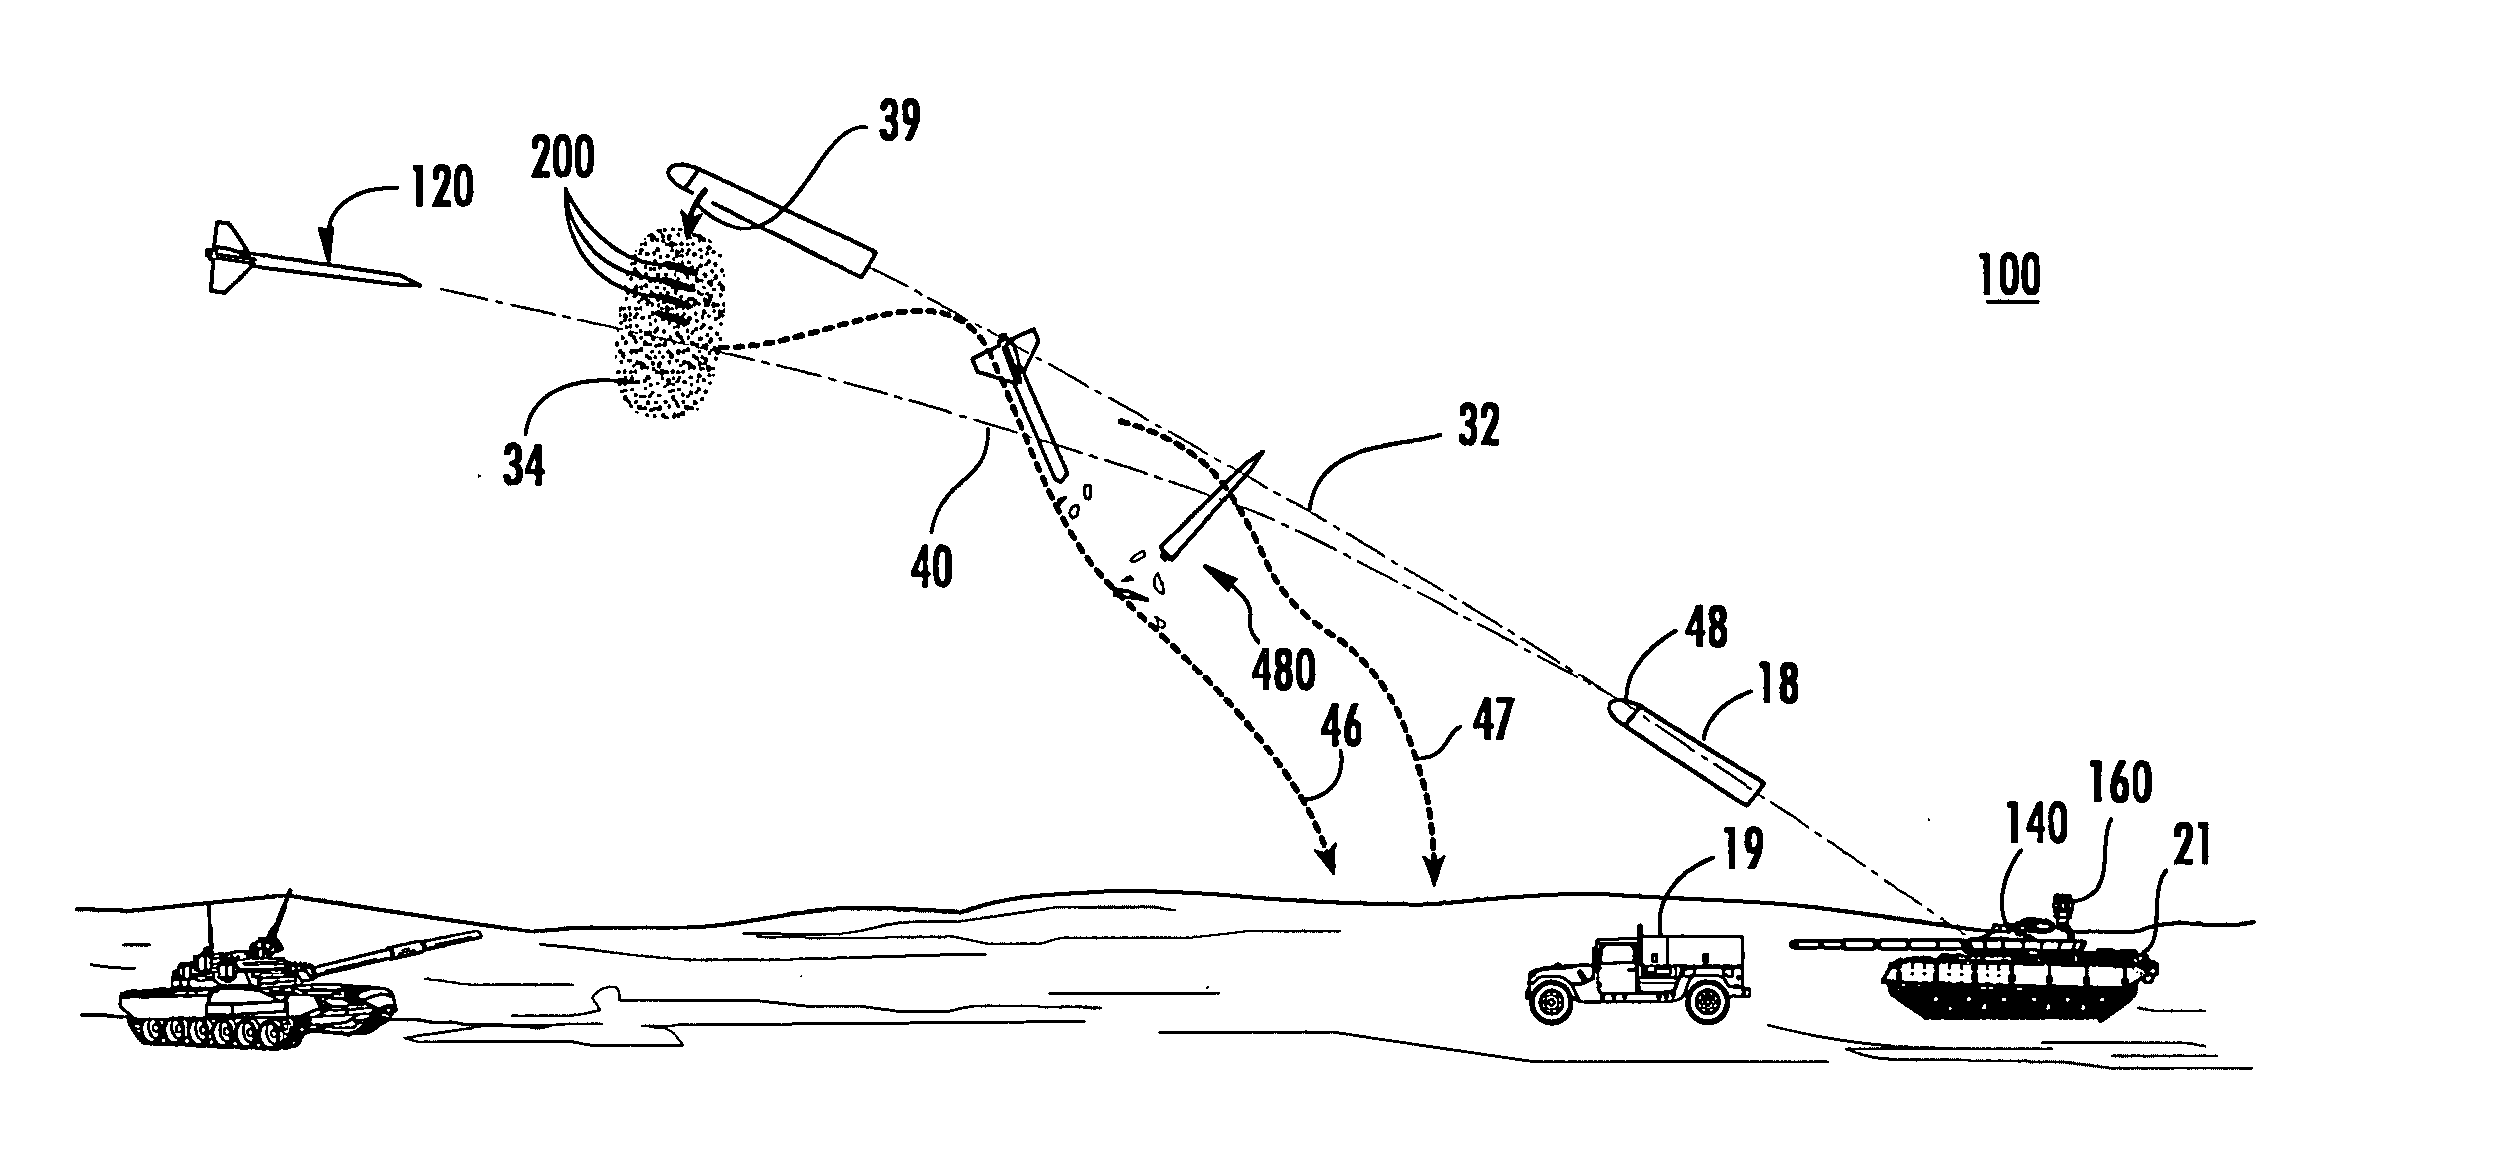 Vehicle-borne system and method for countering an incoming threat